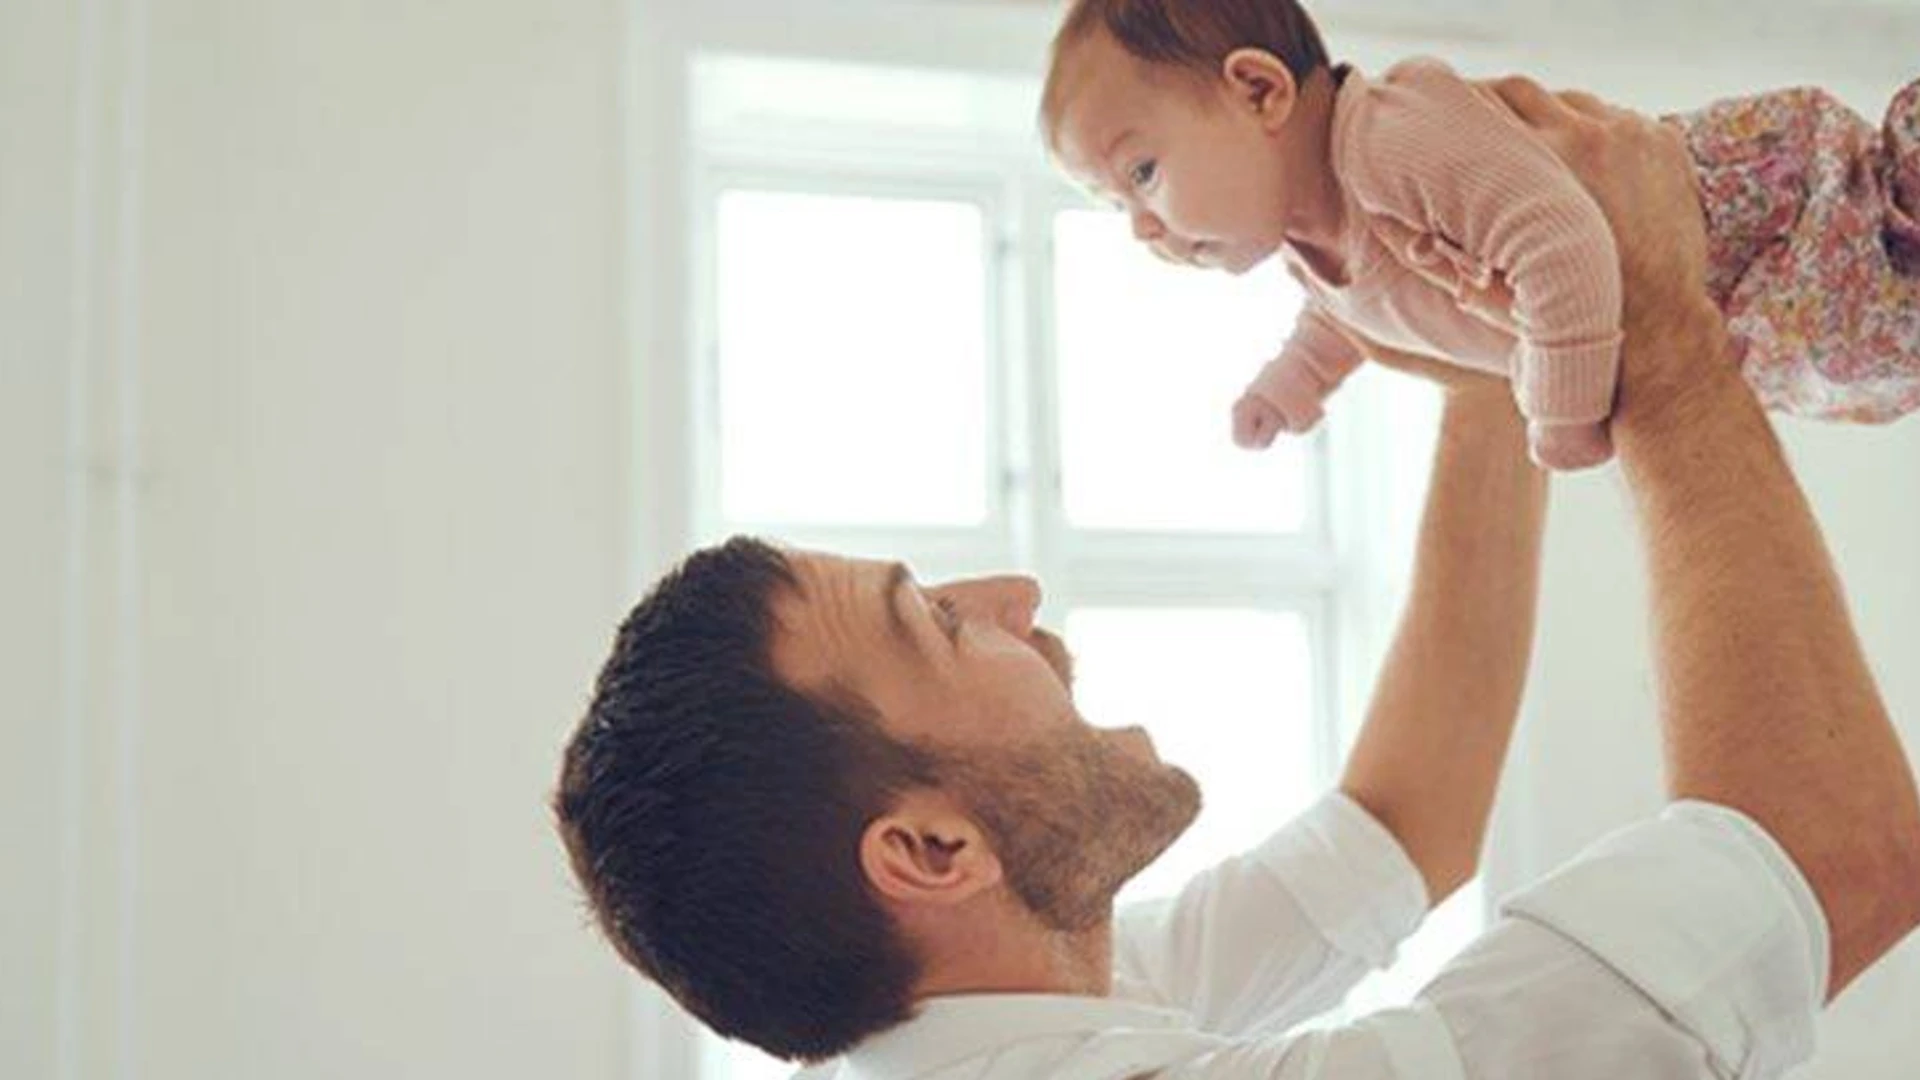 5 Tips for New Dads on Bonding with Their Children